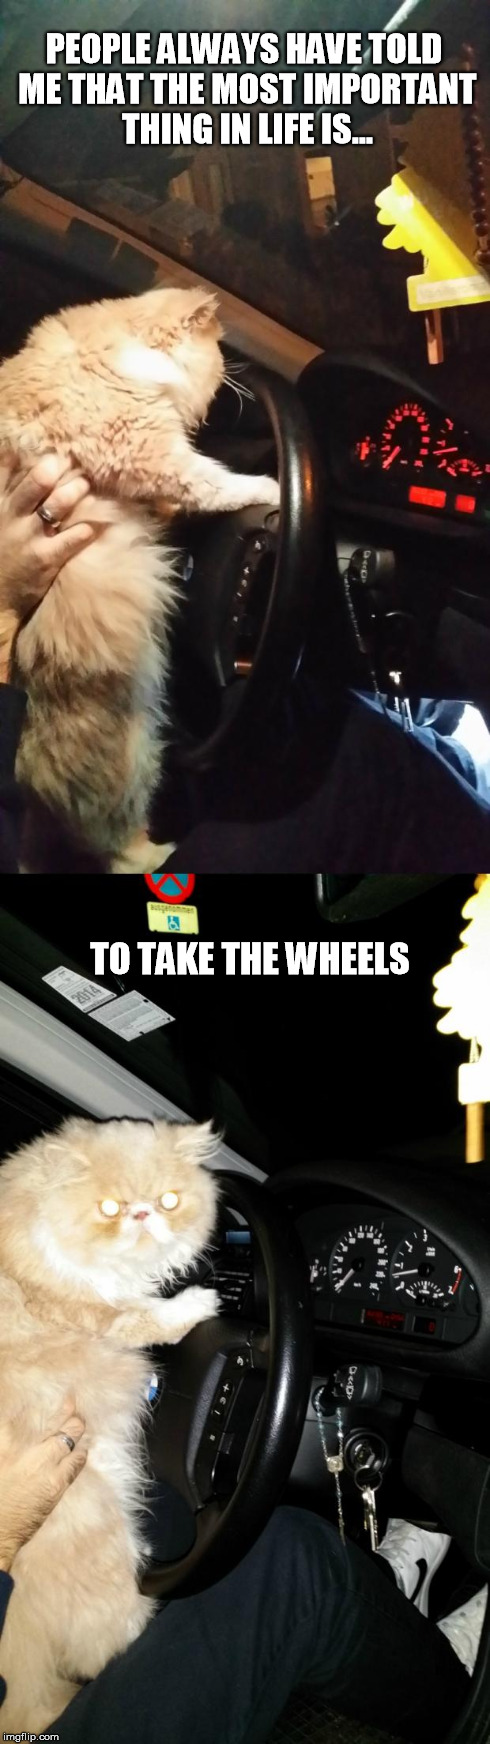 Driving Cat | PEOPLE ALWAYS HAVE TOLD ME THAT THE MOST IMPORTANT THING IN LIFE IS... TO TAKE THE WHEELS | image tagged in driving cat | made w/ Imgflip meme maker